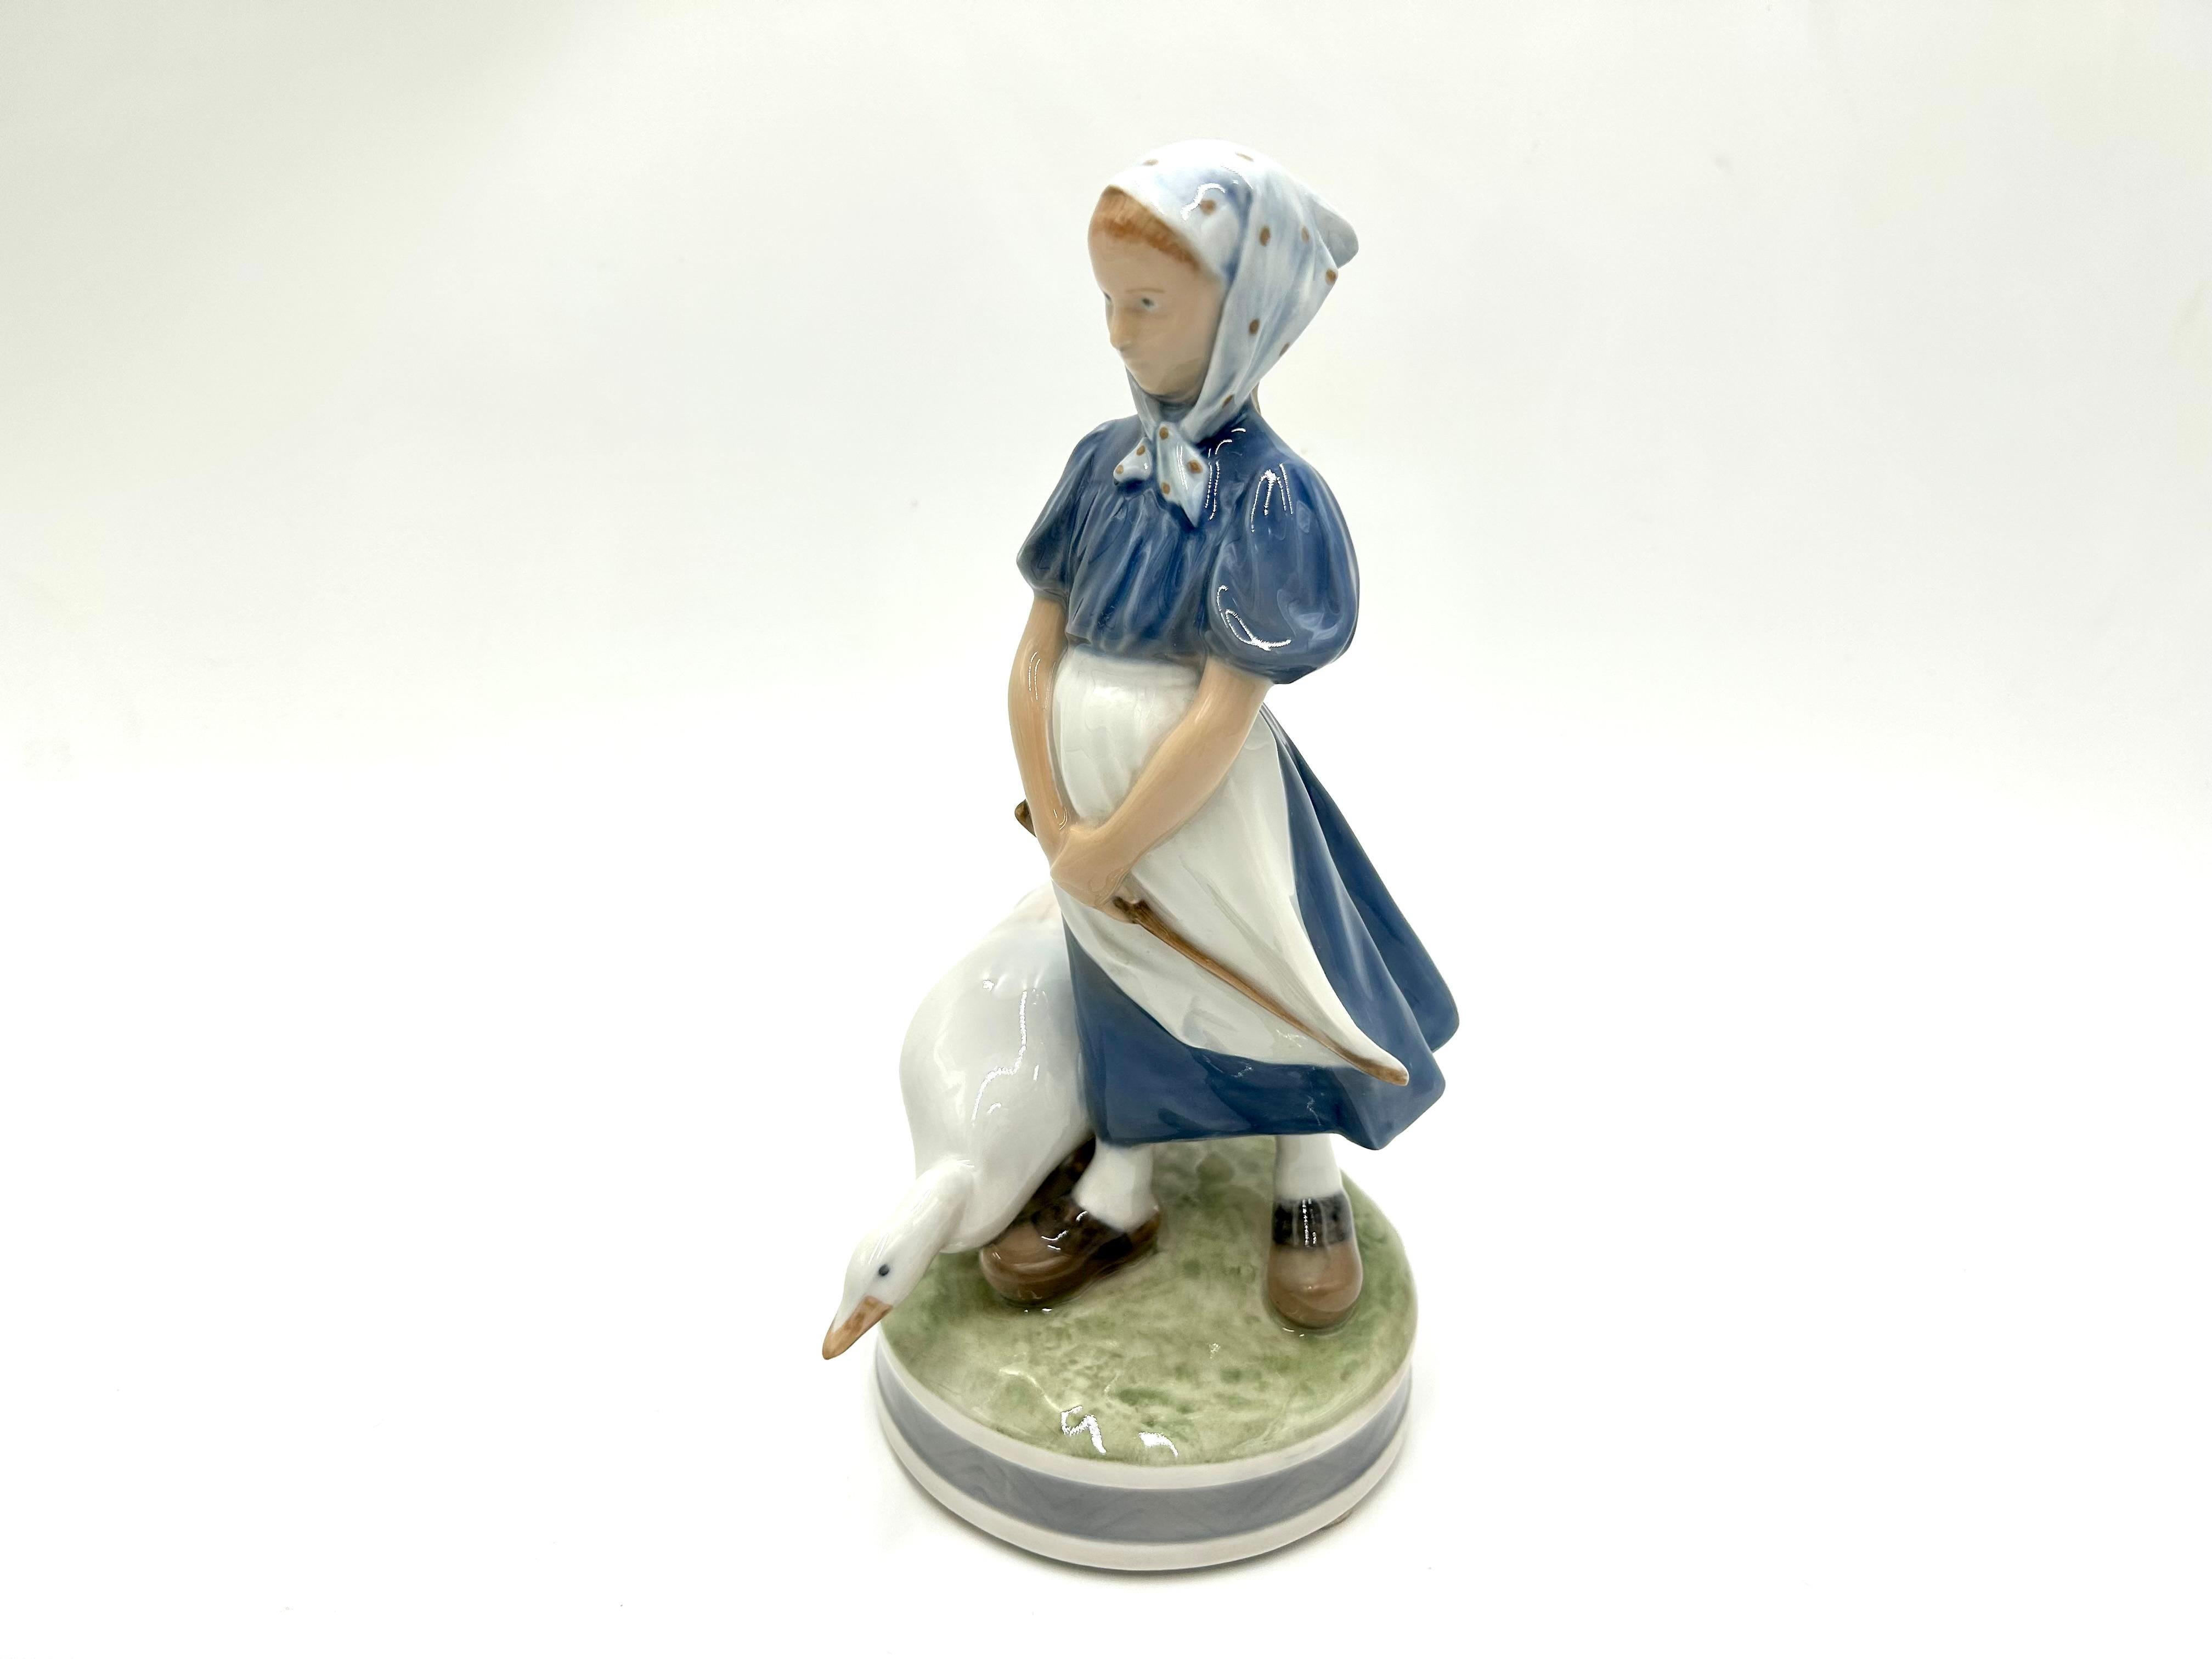 Porcelain figurine of a girl with a goose.
Produced by the Danish manufacture Royal Copenhagen
Signature uses 1969-1973.
Very good condition without damage
Measures: Height: 26cm
Diameter: 10cm.